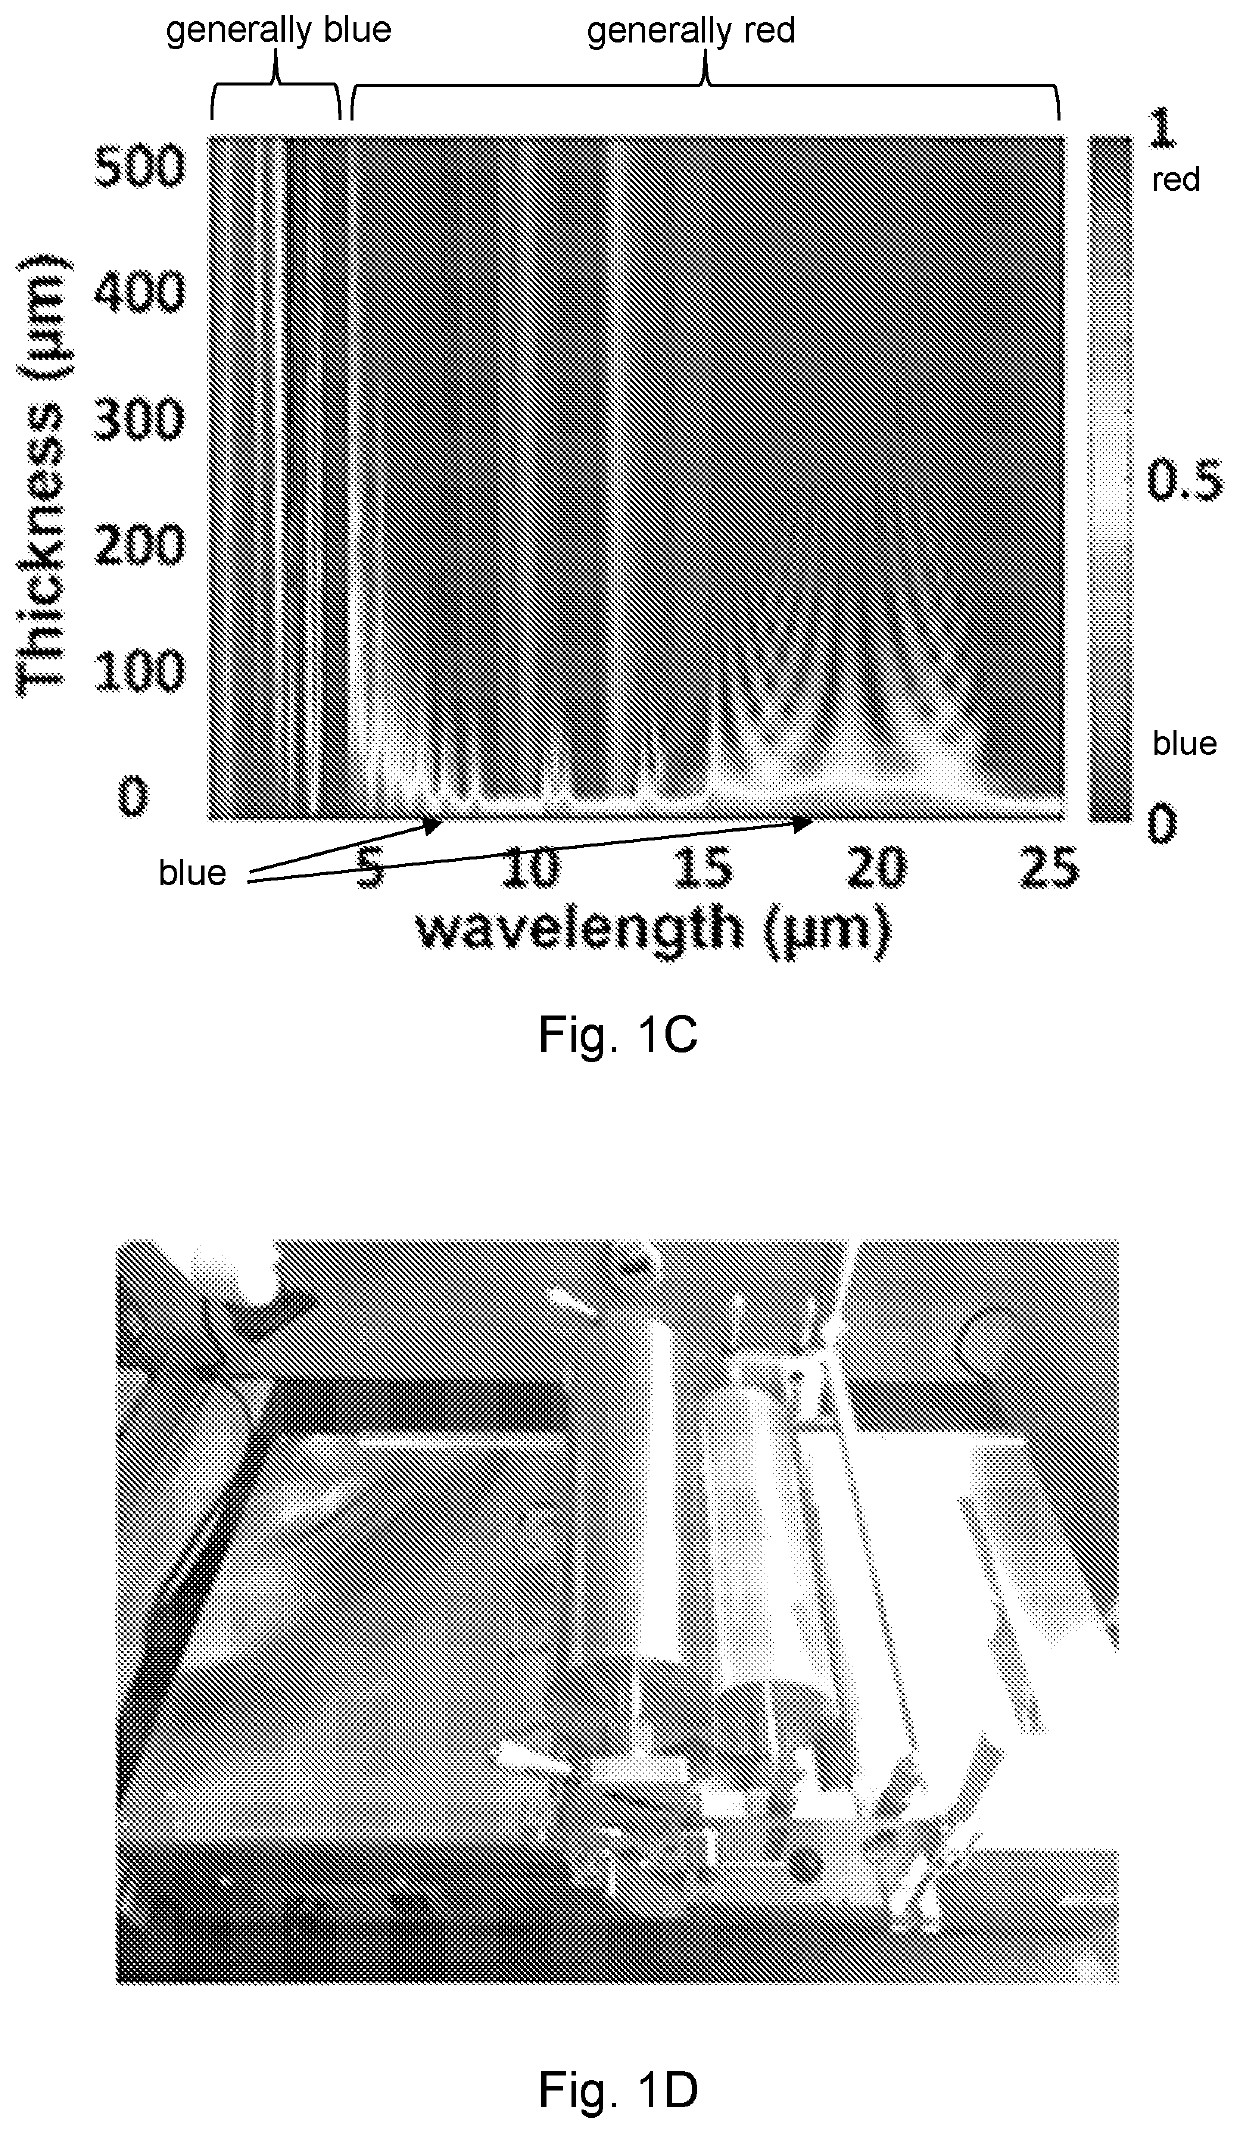 Beam-controlled spectral-selective architecture for a radiative cooler